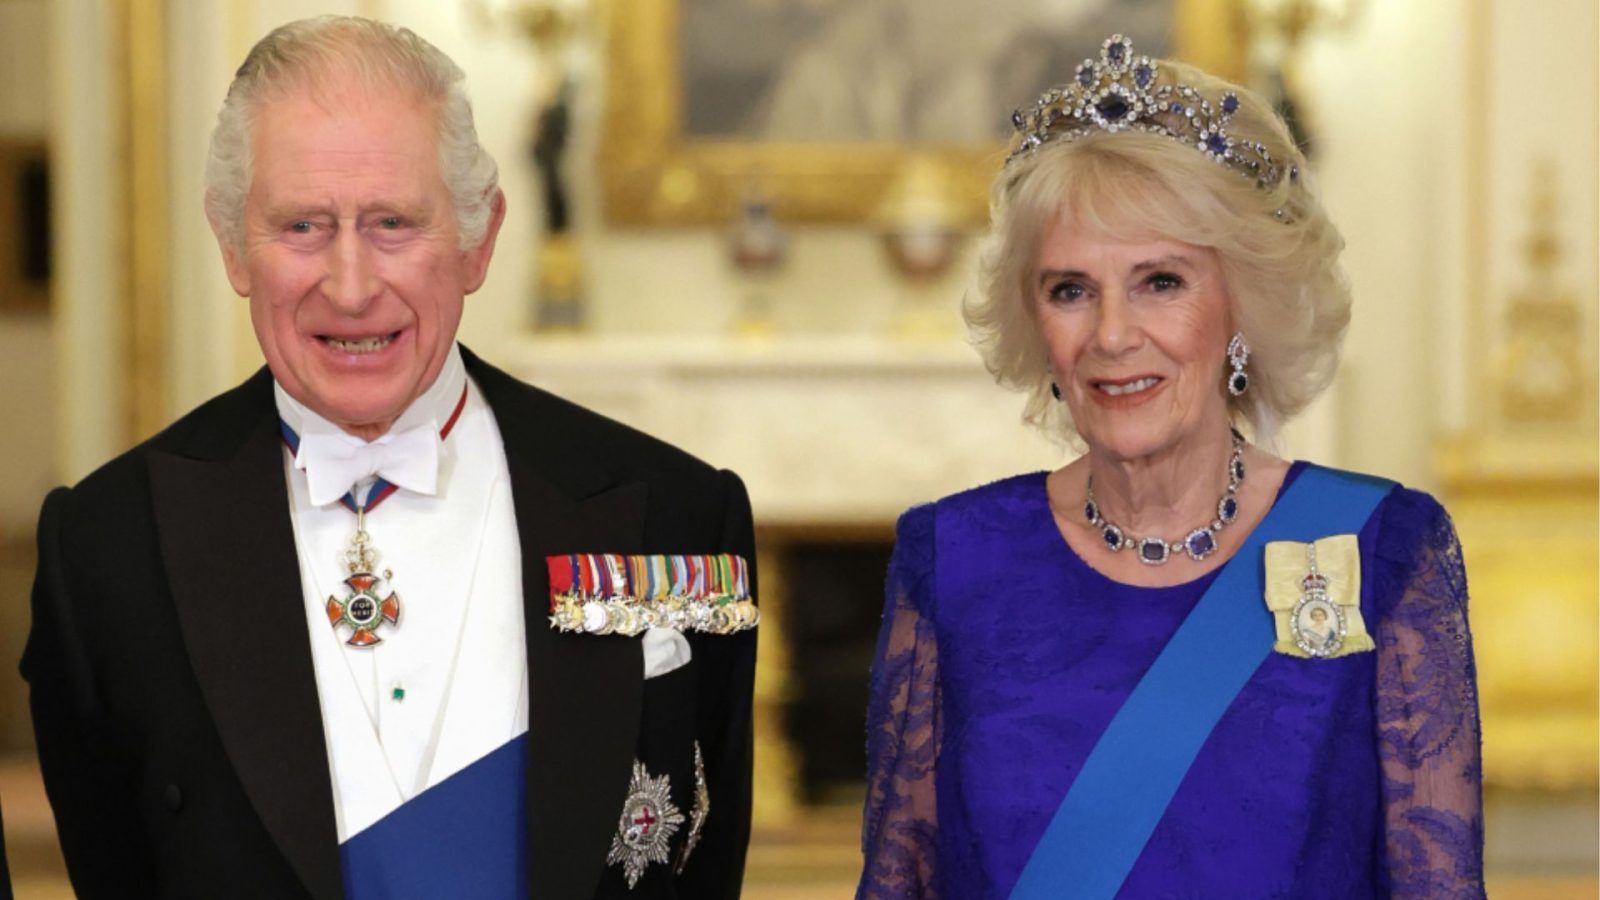 Coronation of King Charles III Guests, procession and other details